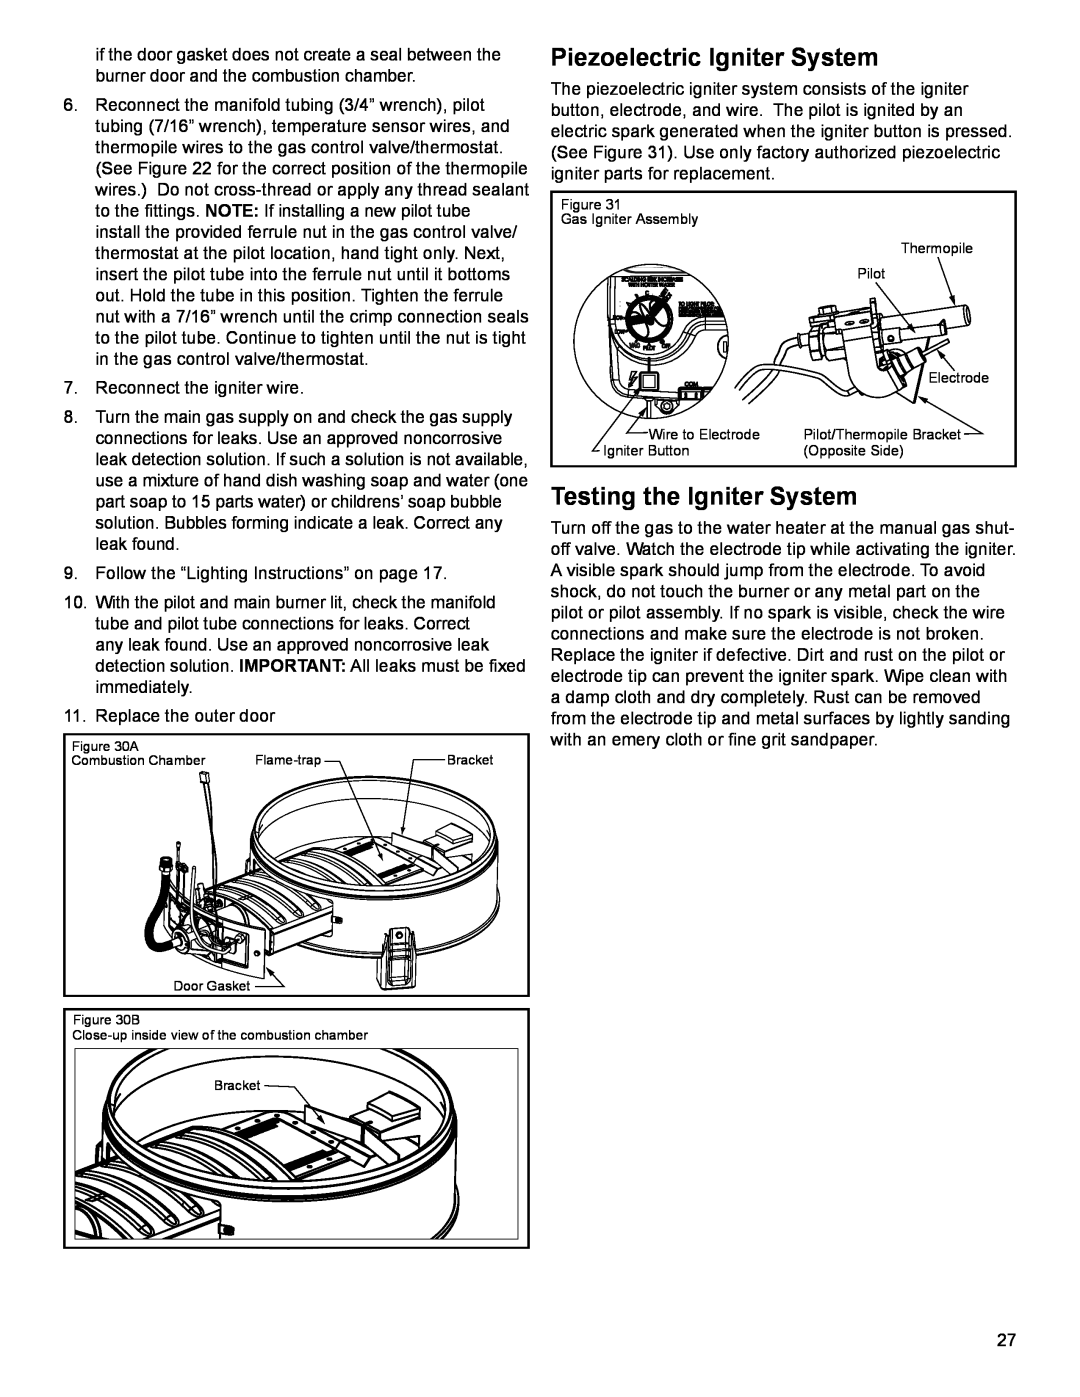 American Water Heater 318935-003 installation instructions Piezoelectric Igniter System, Testing the Igniter System 